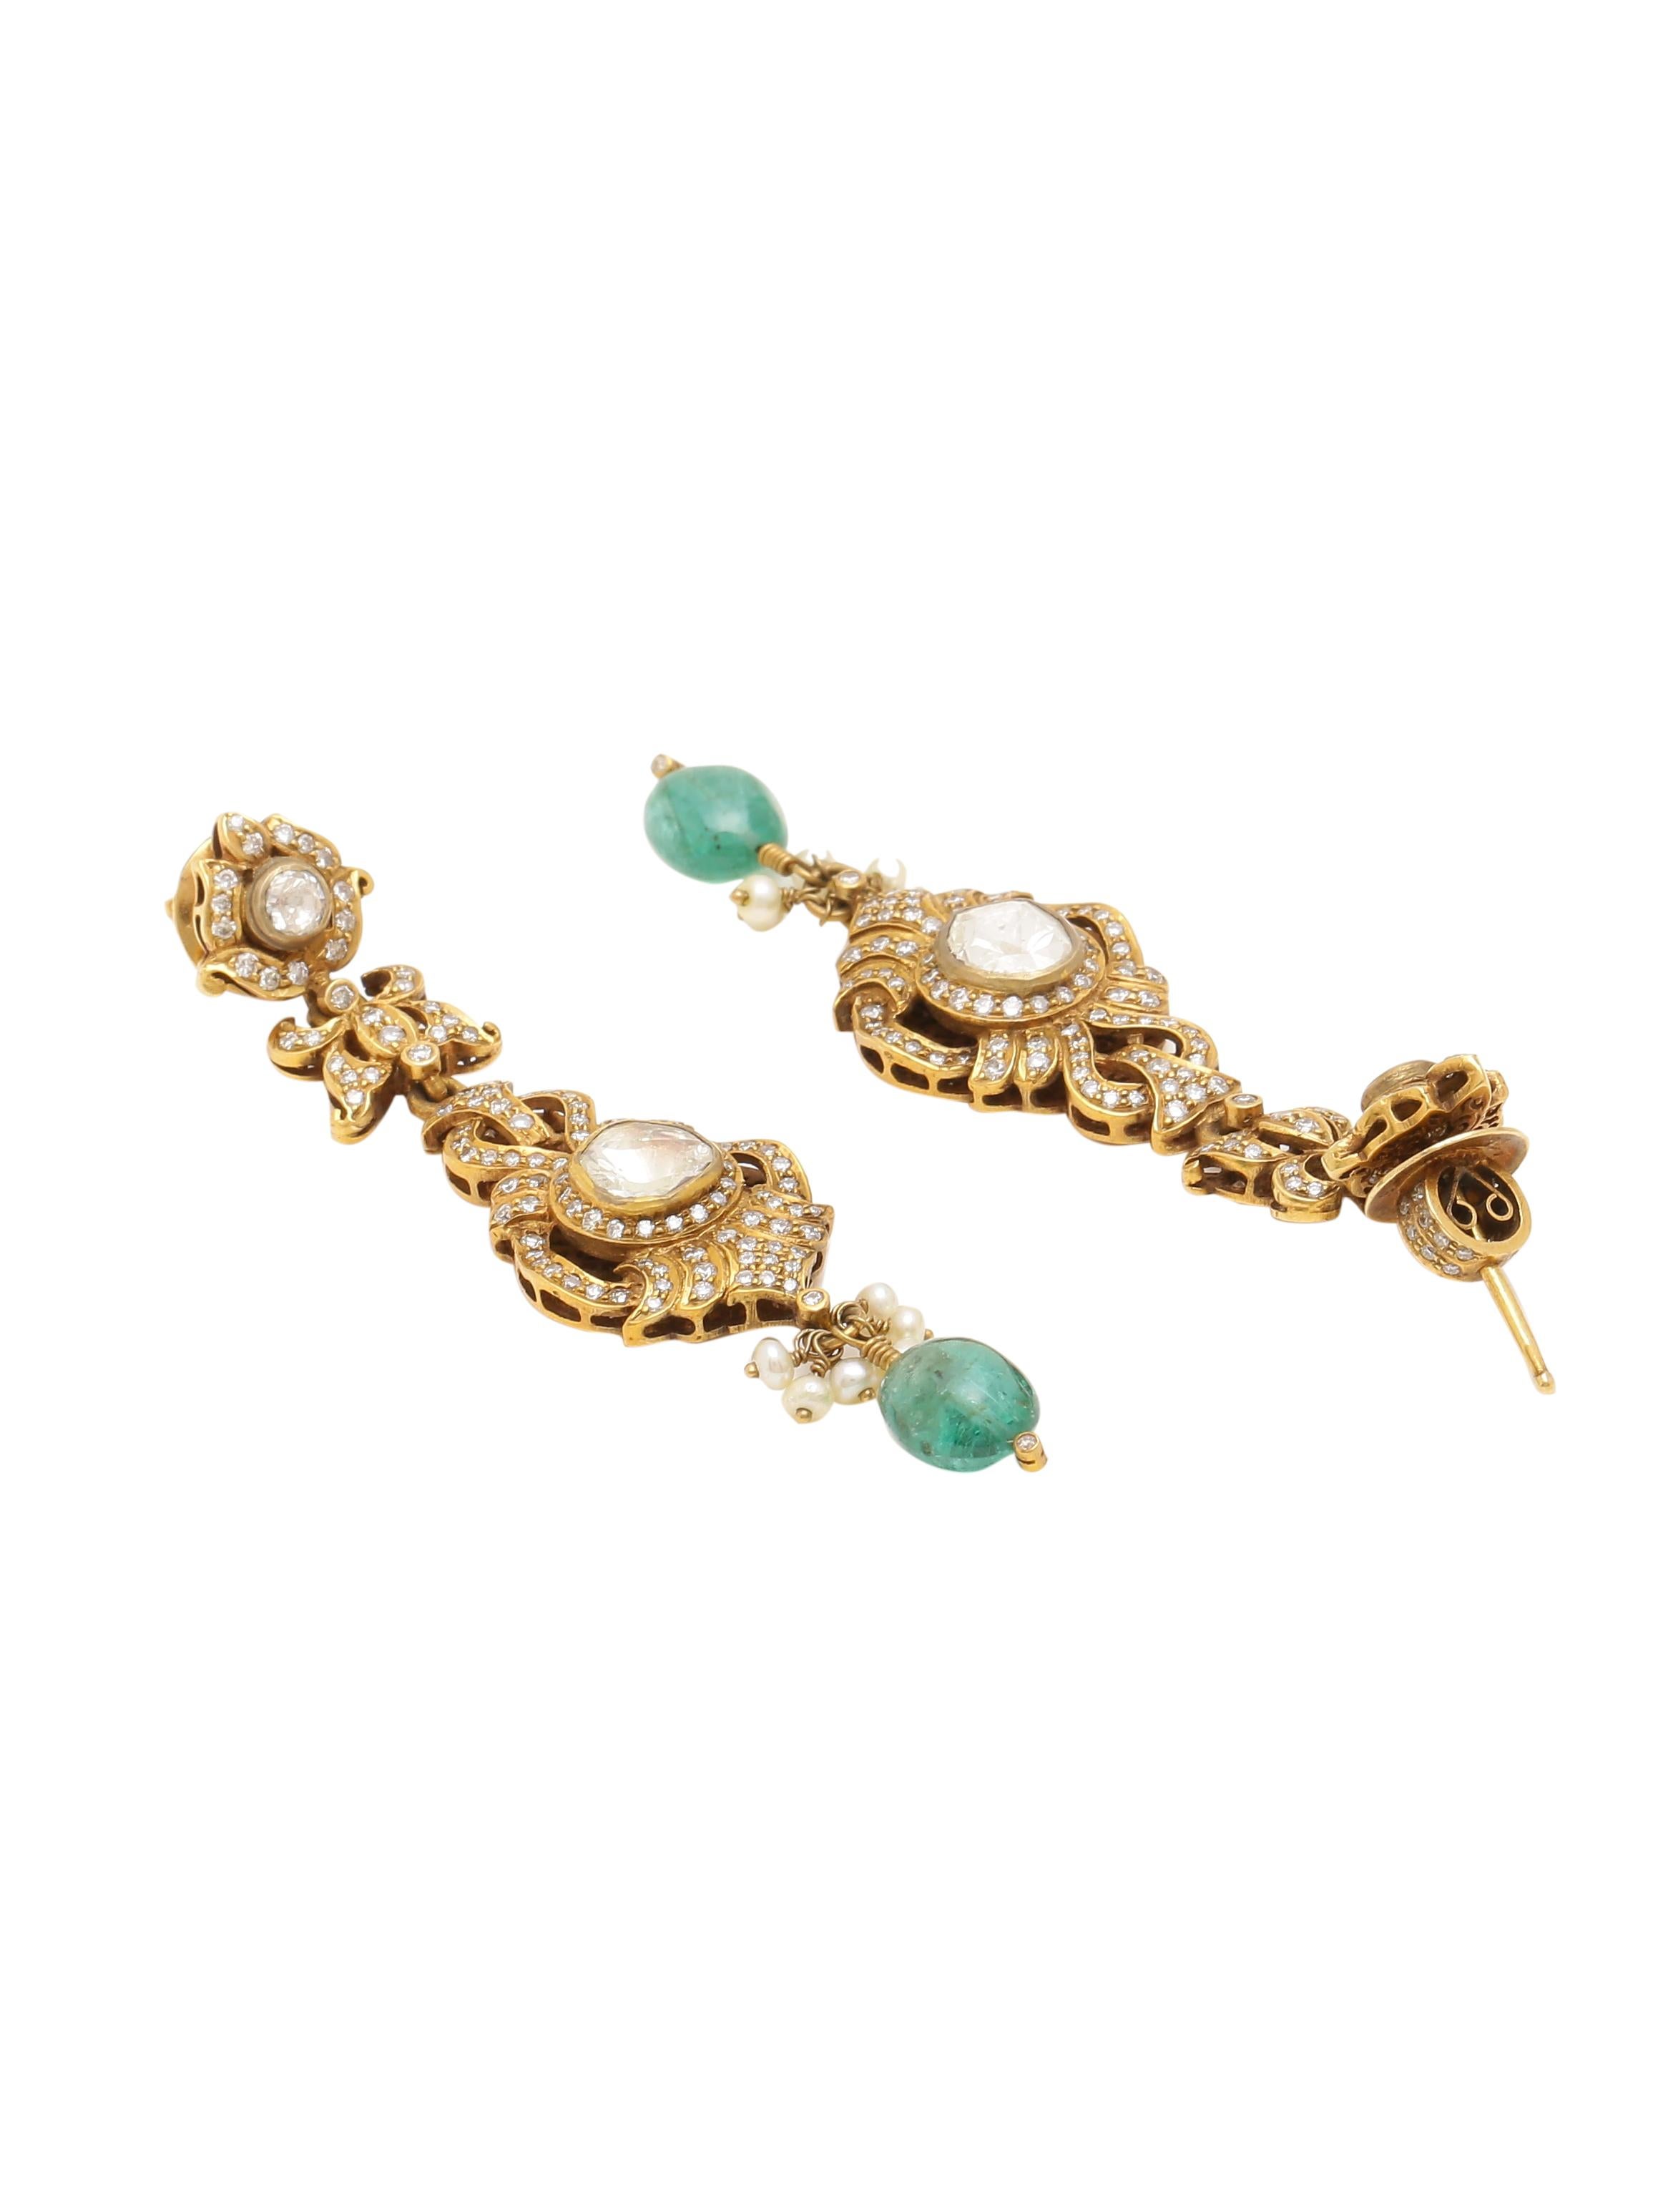 Rose Cut Earring with Diamonds, Pearls and Emeralds Handcrafted in 18 Karat Yellow Gold For Sale